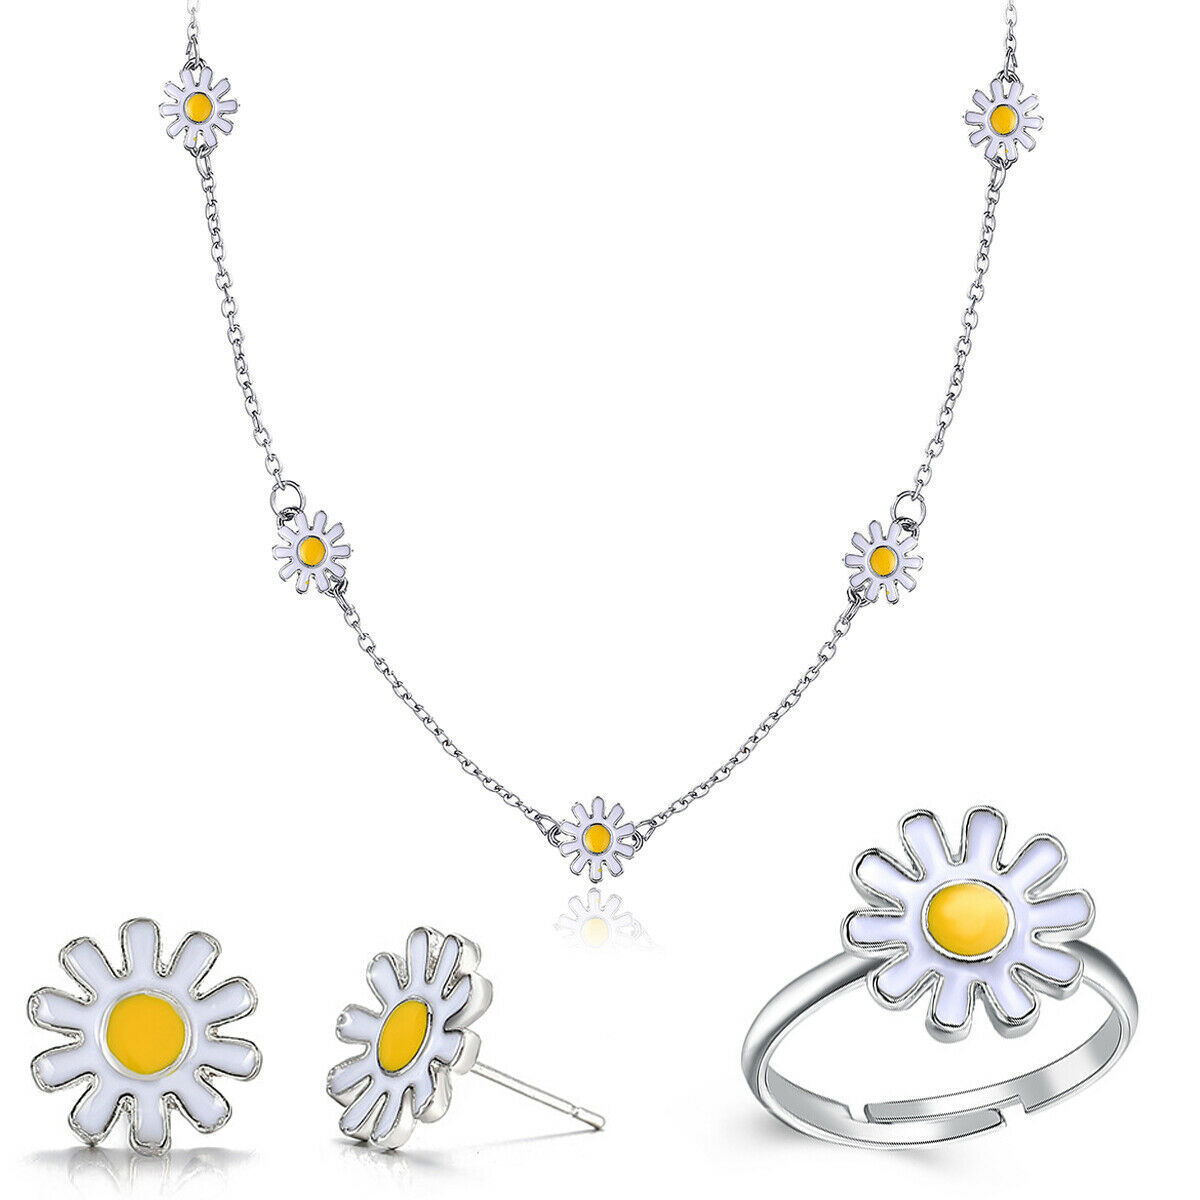 Silver Cherry Blossom White Gold Flower Jewelry Set: Necklace&Earring&Ring